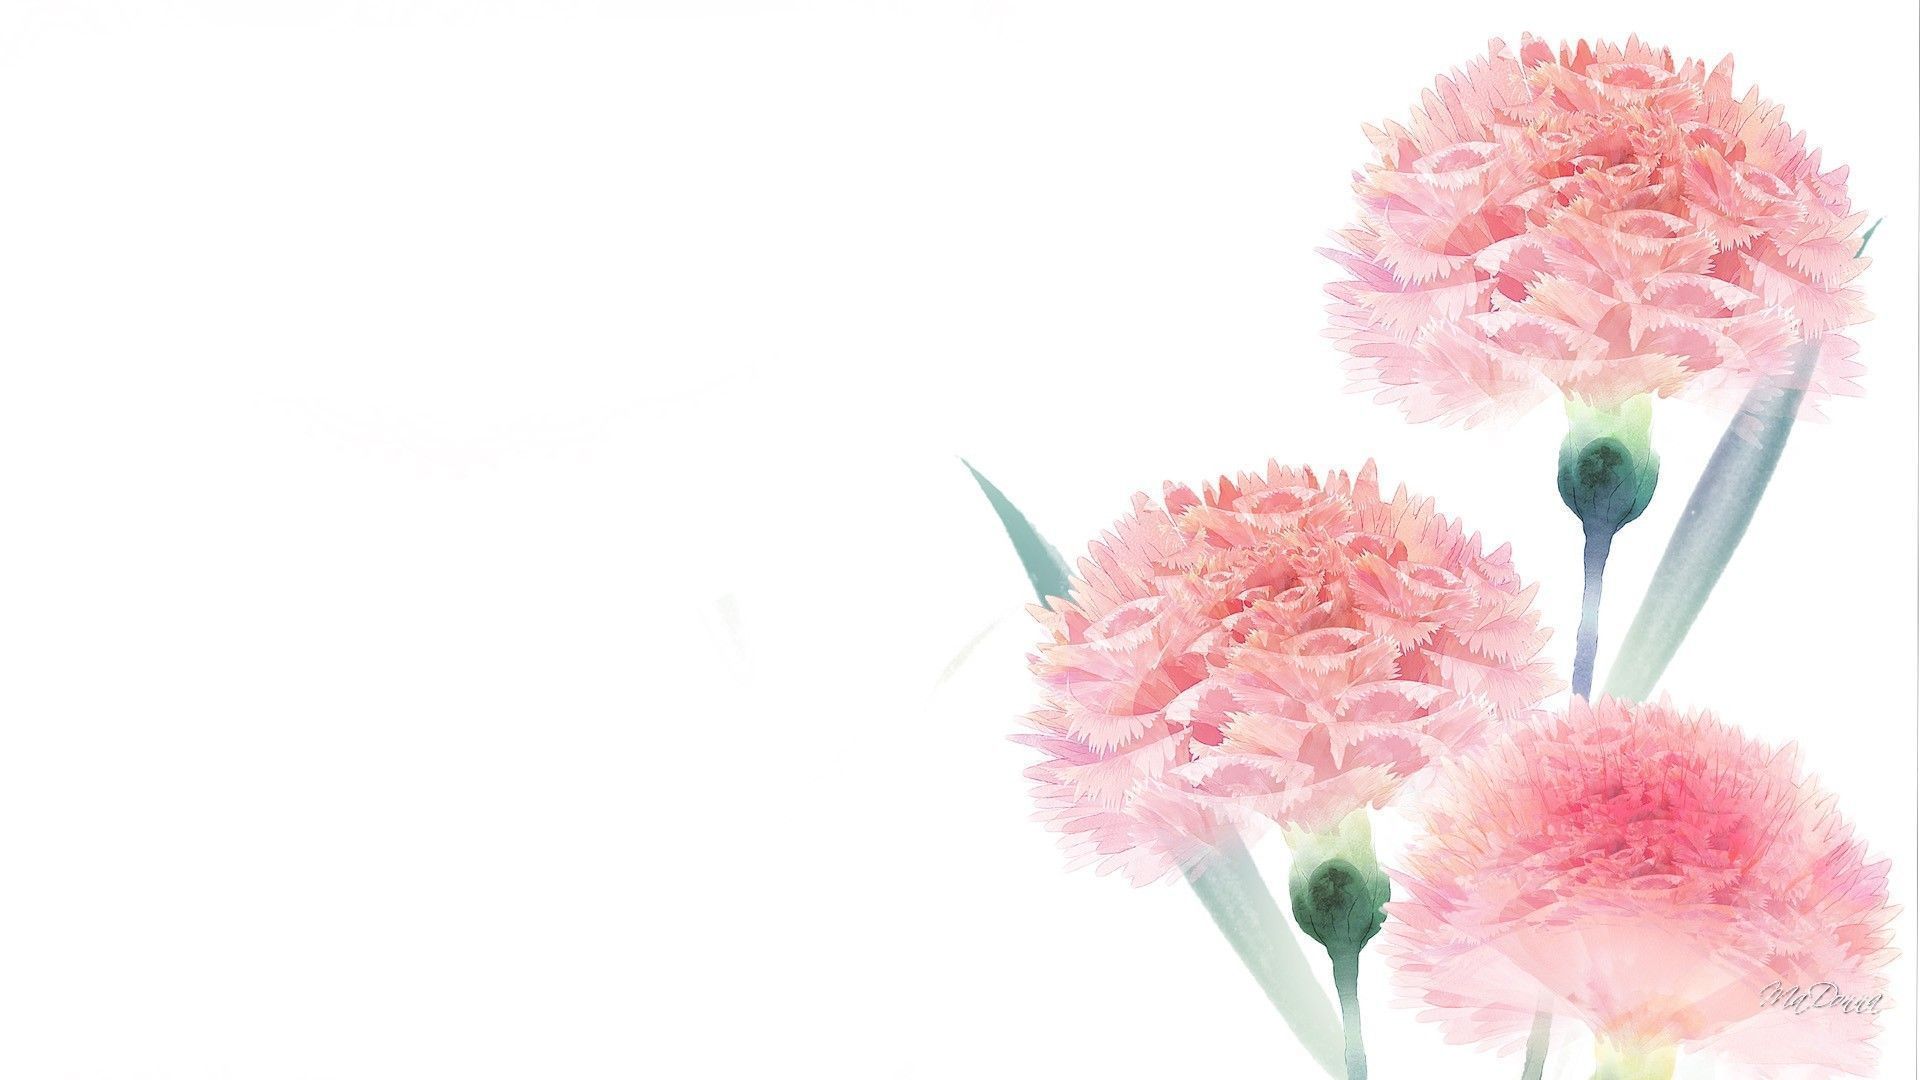 15 Top minimalist flower desktop wallpaper You Can Use It For Free ...